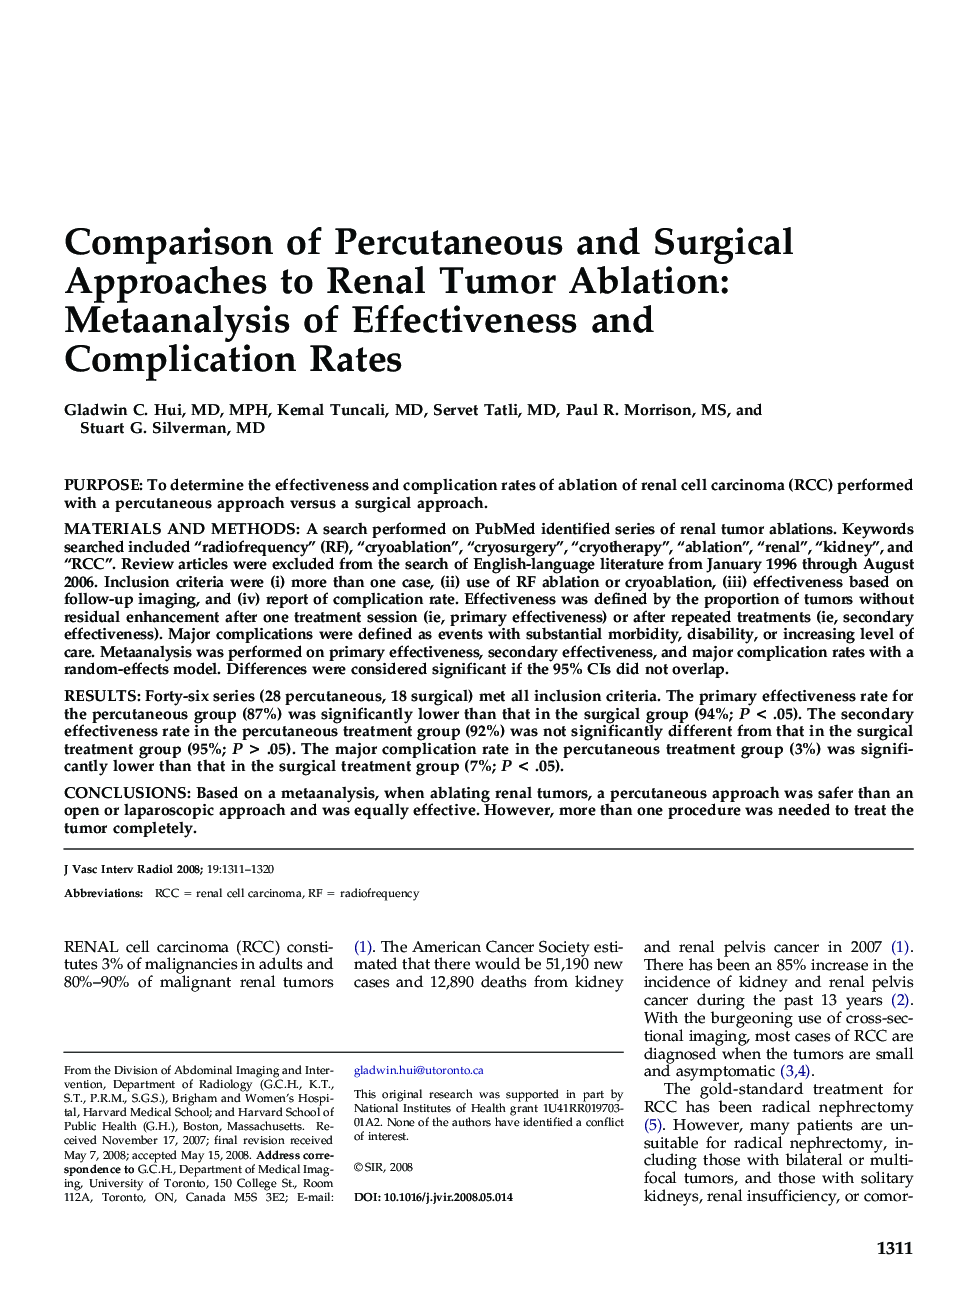 Comparison of Percutaneous and Surgical Approaches to Renal Tumor Ablation: Metaanalysis of Effectiveness and Complication Rates